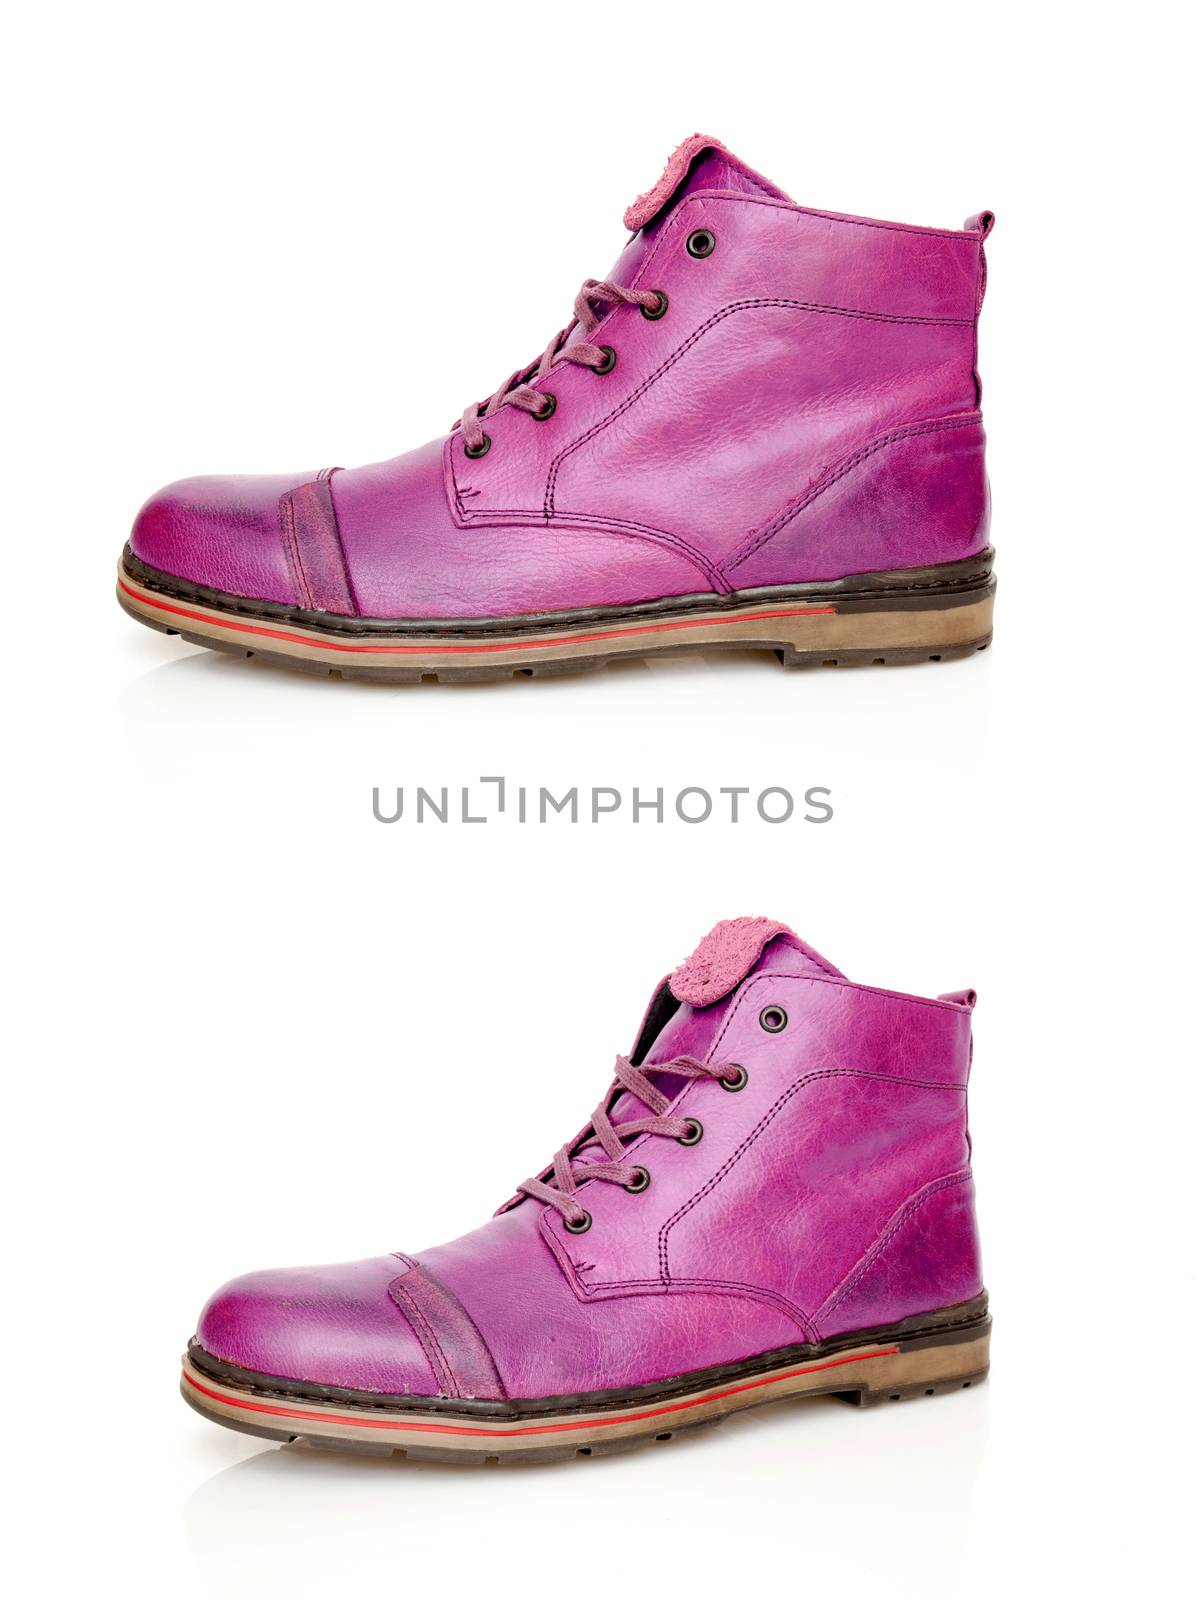 Male purple boots on white background, isolated product. by GeorgeVieiraSilva